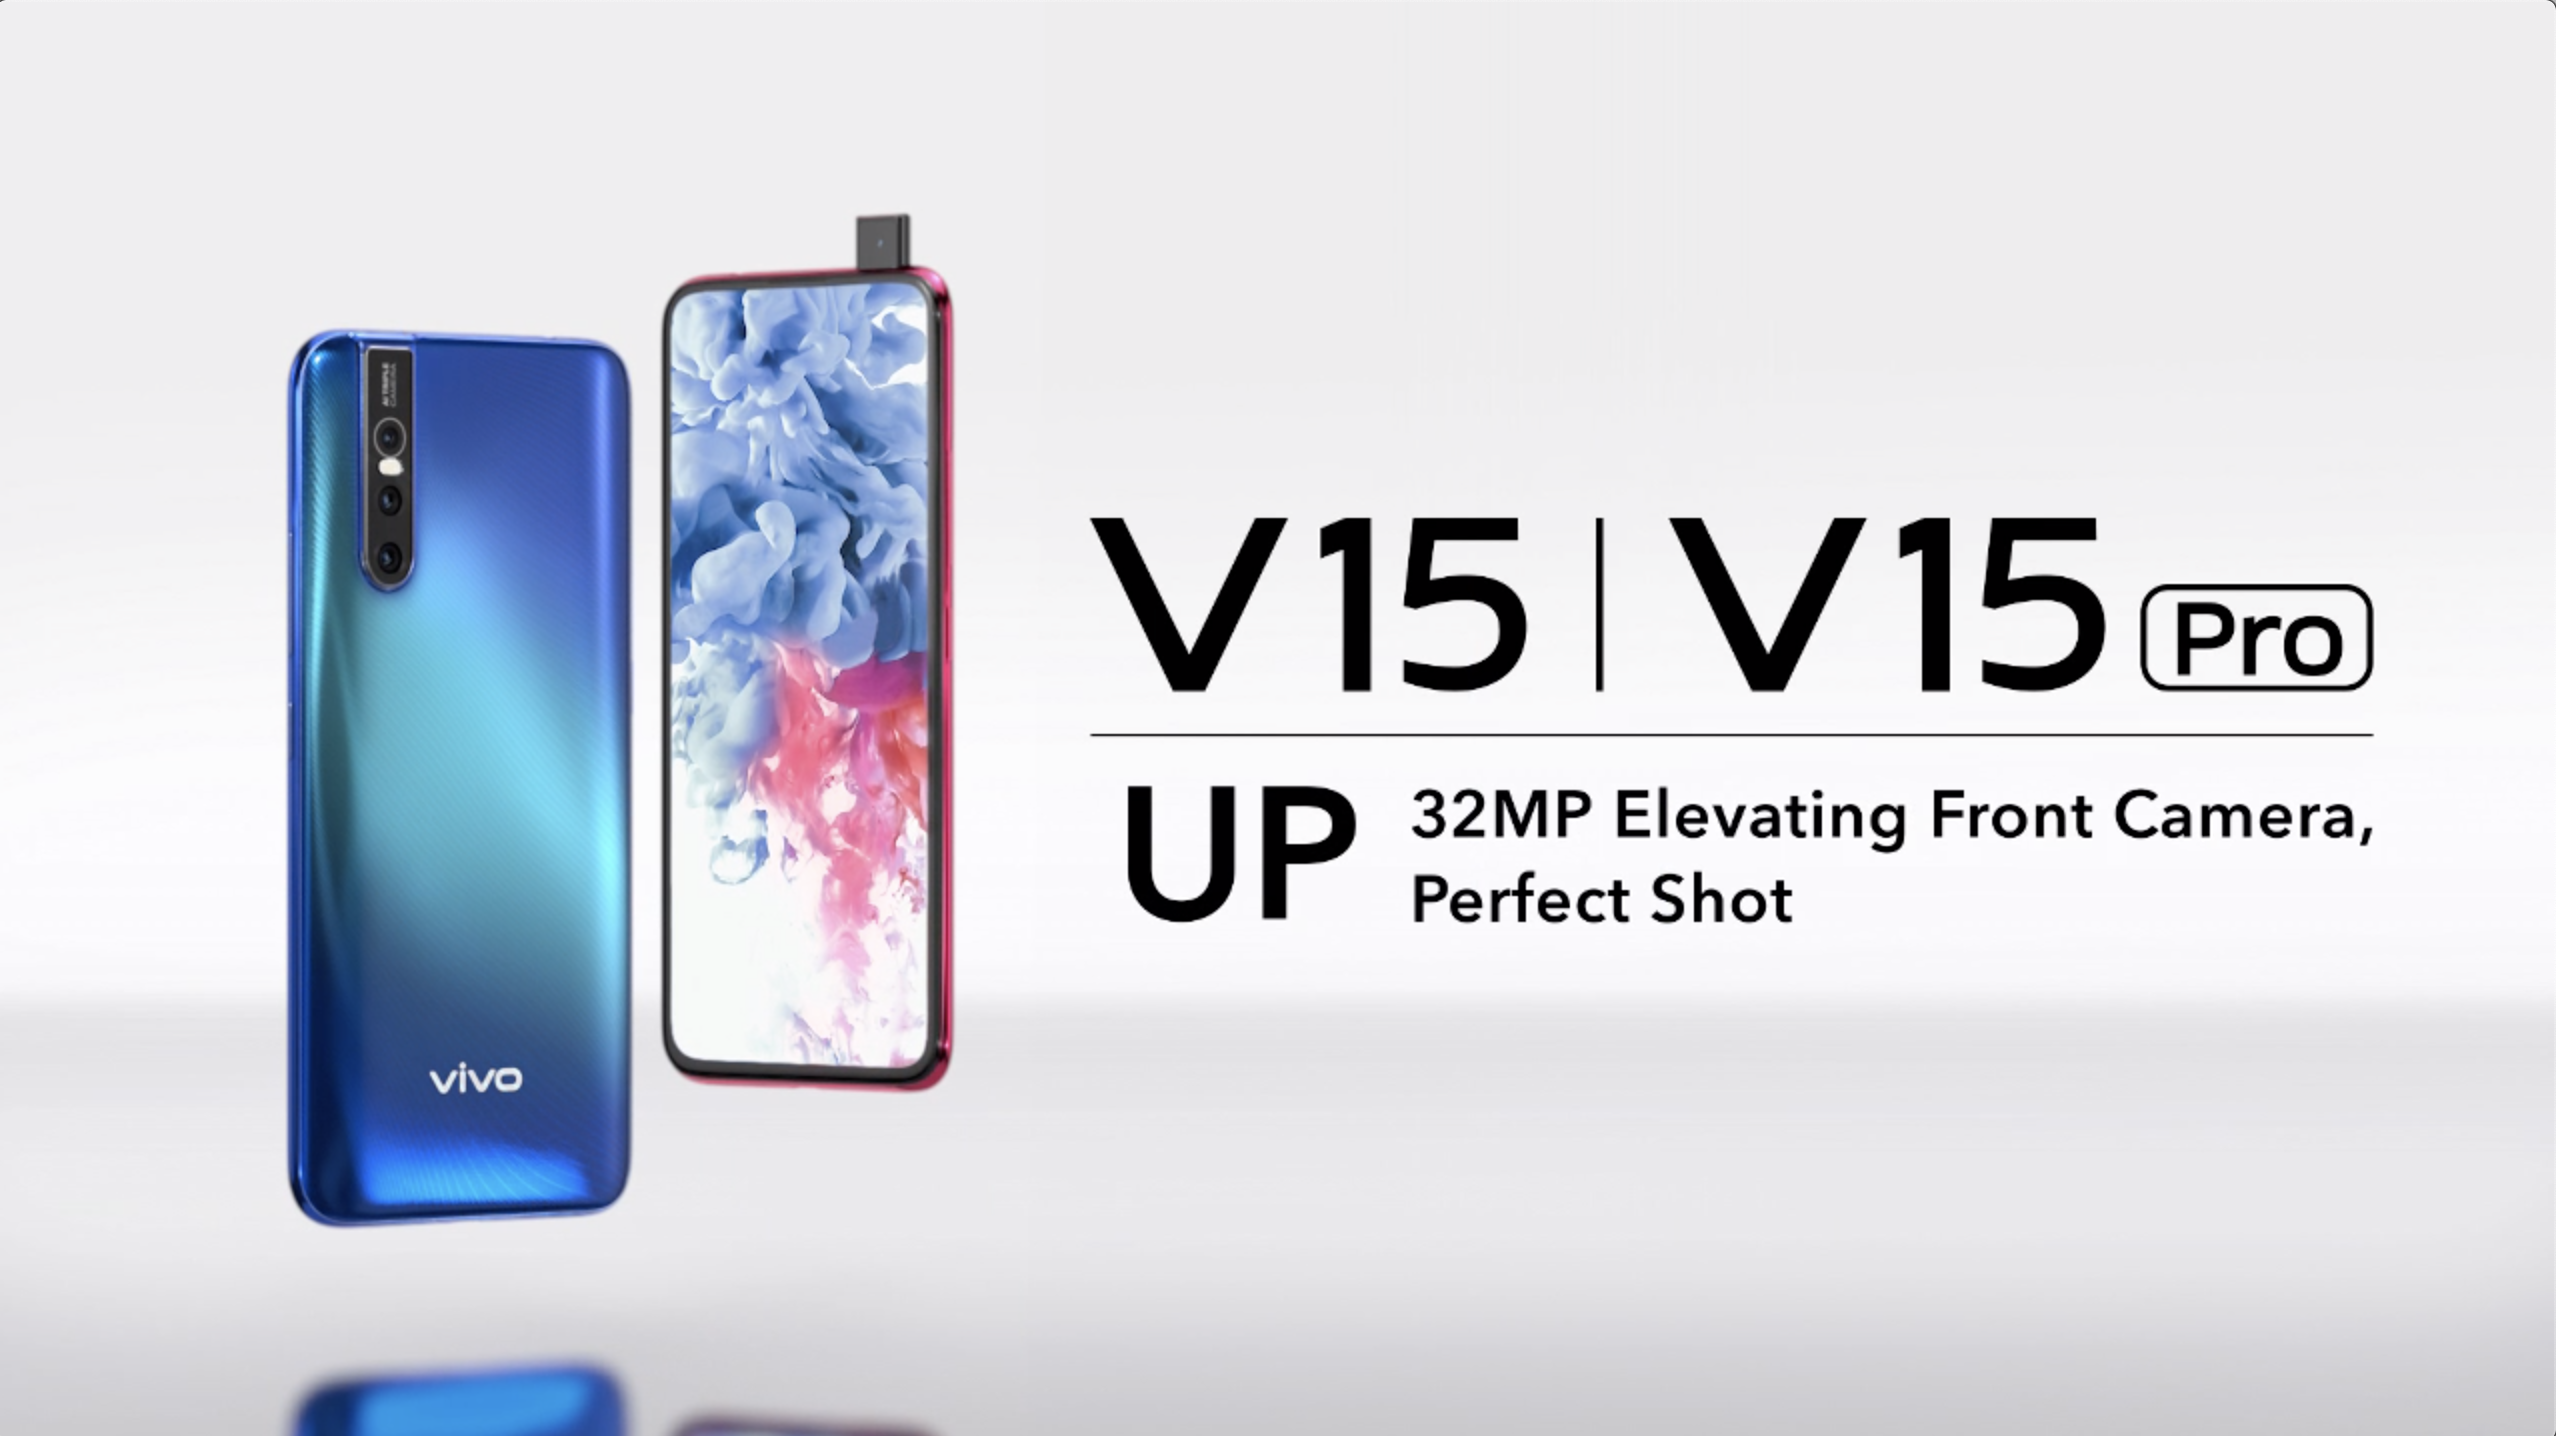 VIVO "All in One"